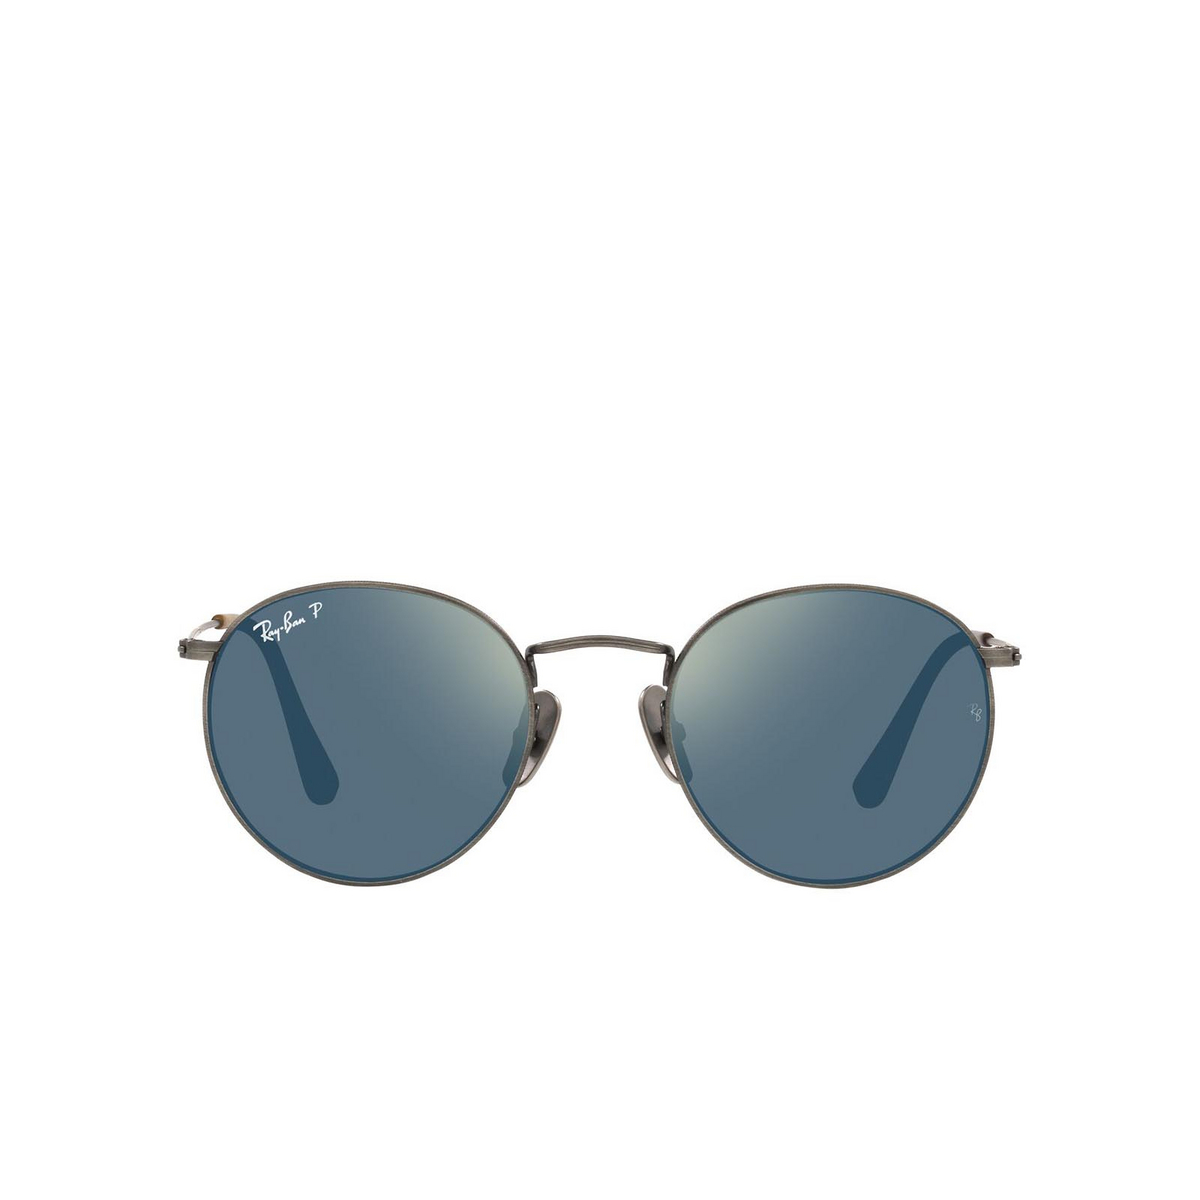 Ray-Ban RB8247 Sunglasses 9208T0 Demigloss Petwer - front view